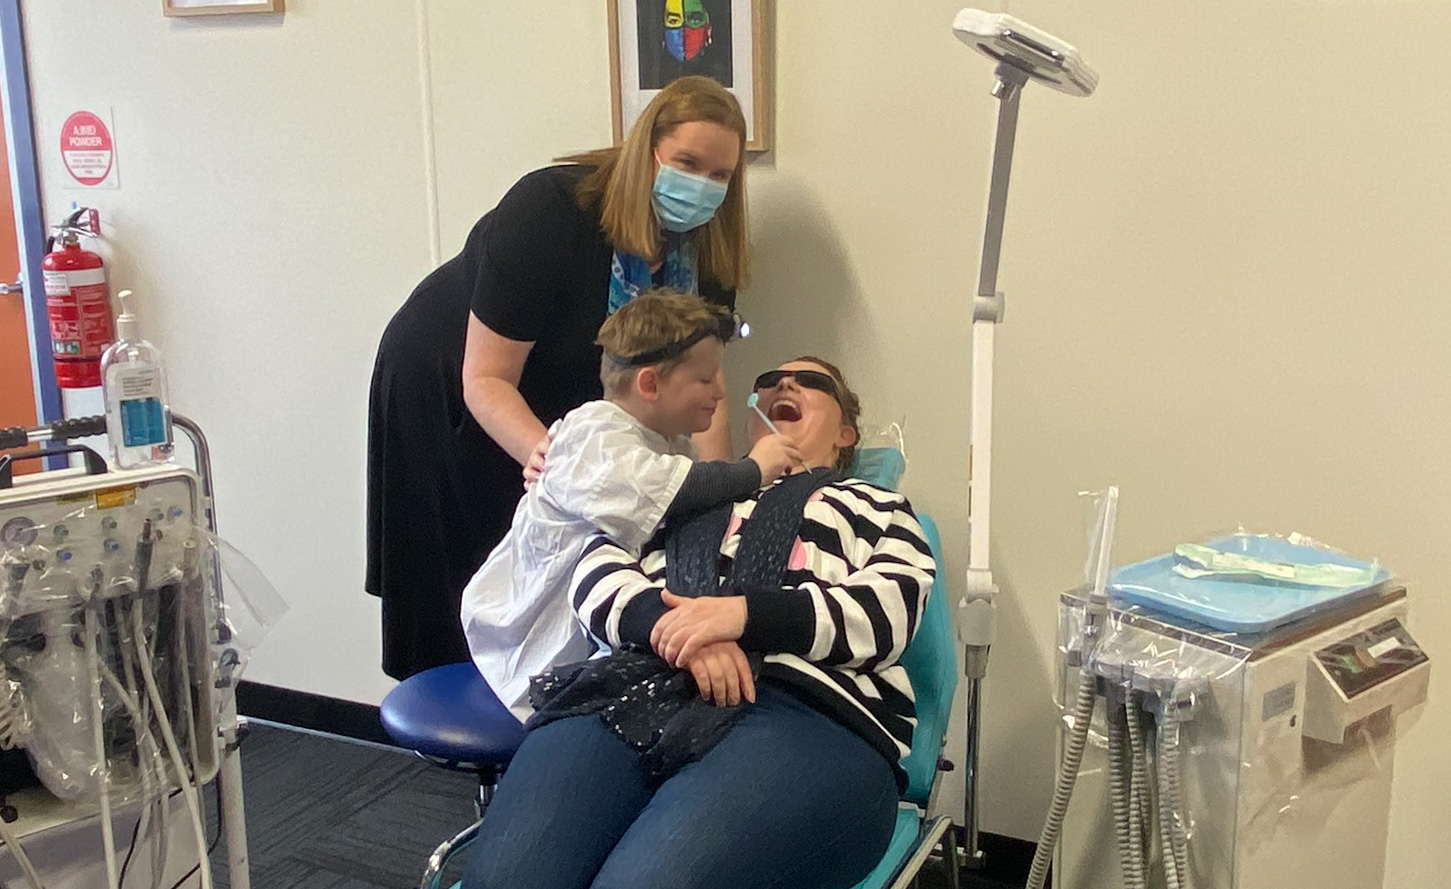 Jodie Robinson (Clinical Coordinator, Dental Services Grampians Health) watches on as Cooper treats his mum and Grampians Health Oral Health Educator, Courtney Liversage in a mobile dental clinic